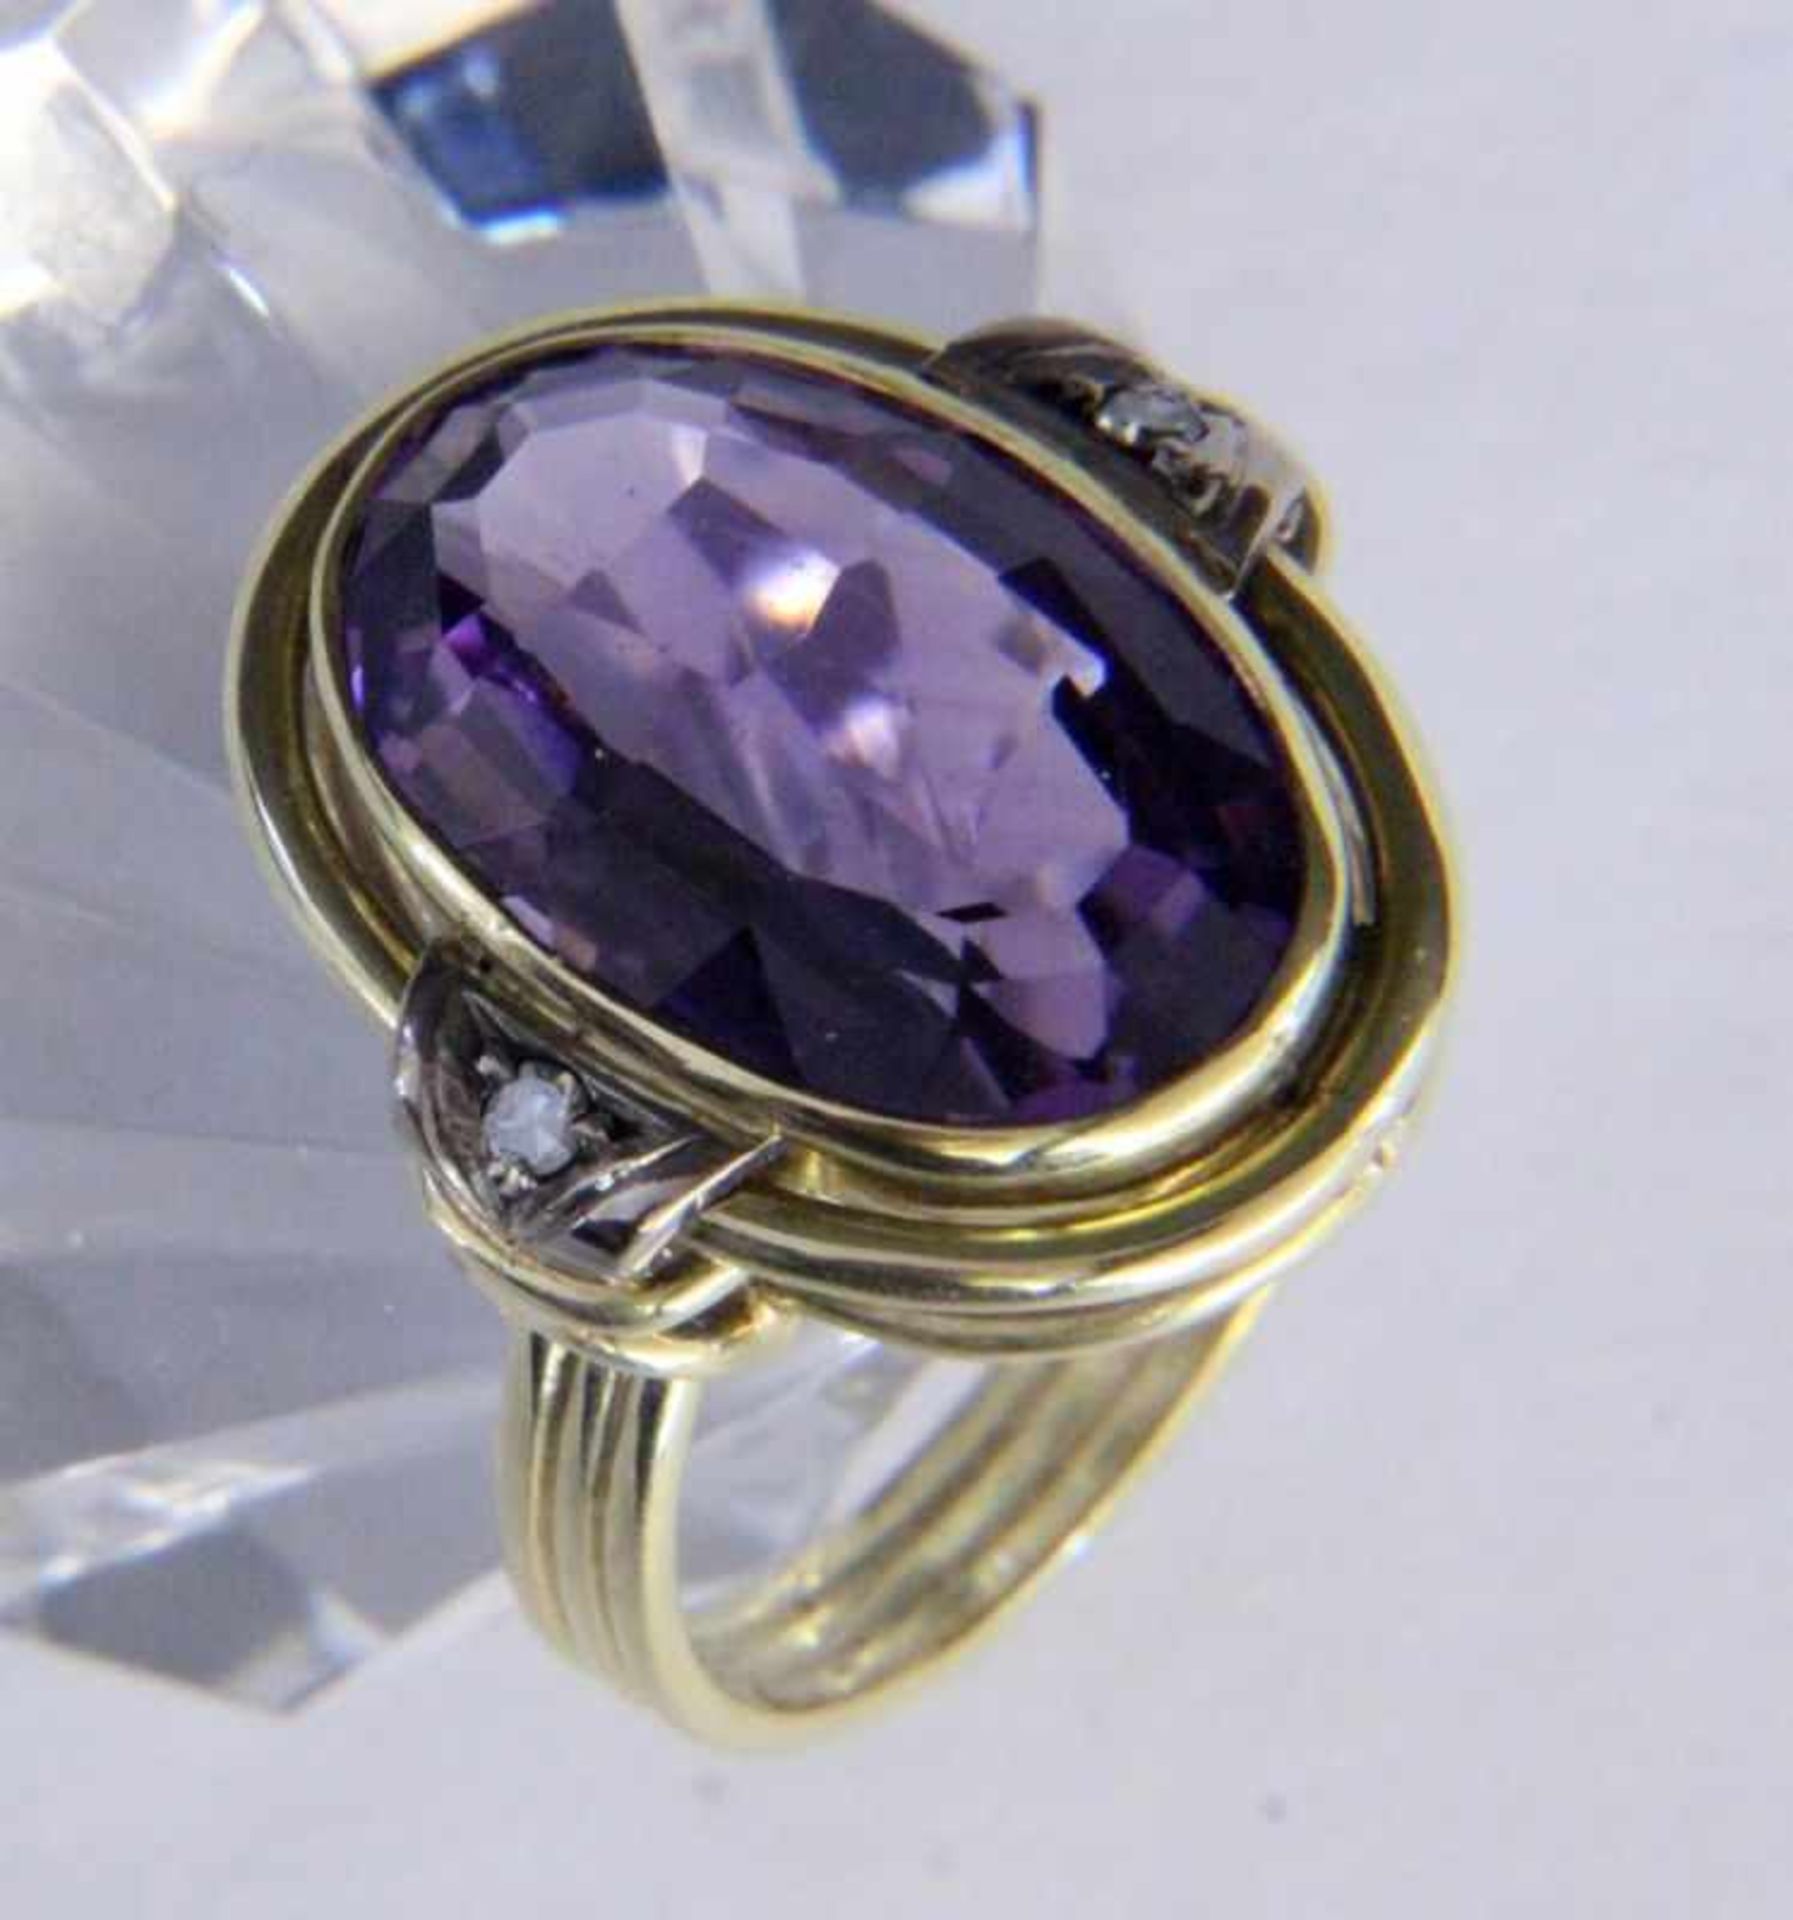 A LADIES' RING 585/000 yellow gold with amethyst and 2 brilliant cut diamonds. Ring size56, gross